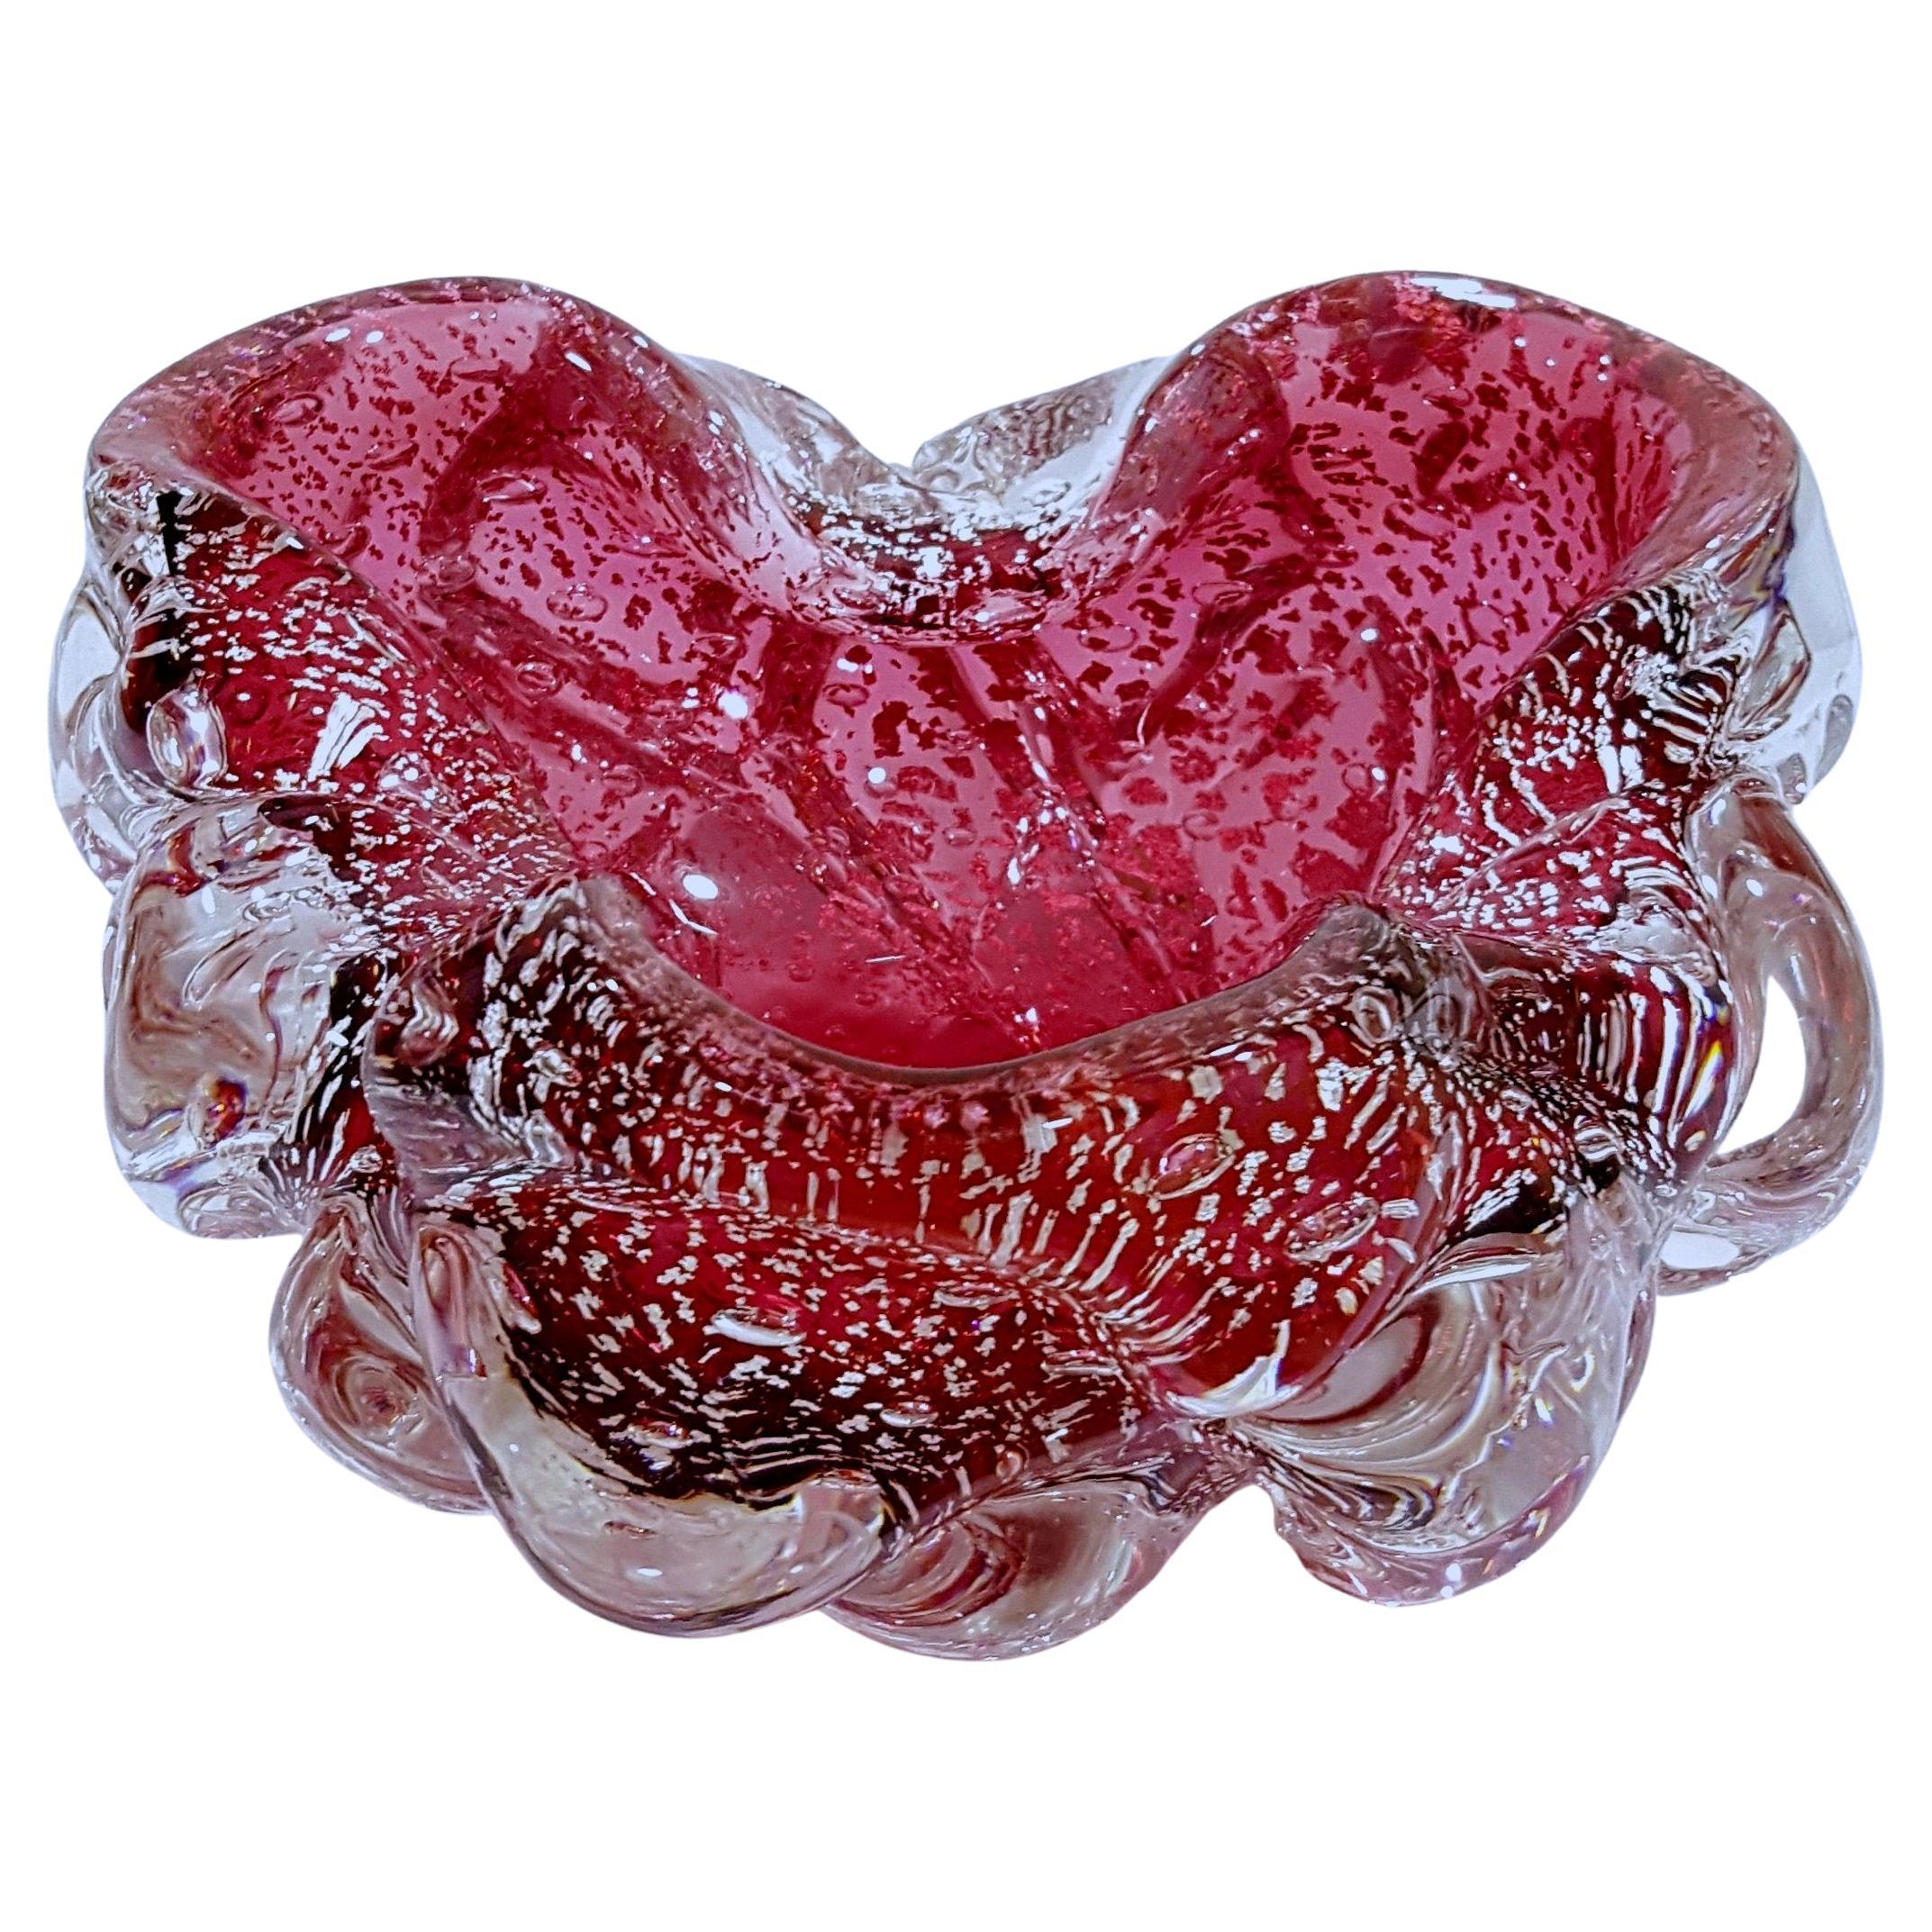 Murano Glass Lenti Bowl, Huge Silver-Flecked Raspberry. Amazing! 
Nice vintage condition. We found no chips or cracks.
Vintage Murano Glass Lenti  Bowl with Bullicante (controlled bubbles) encased in the glass.  Raspberry color with abundant silver